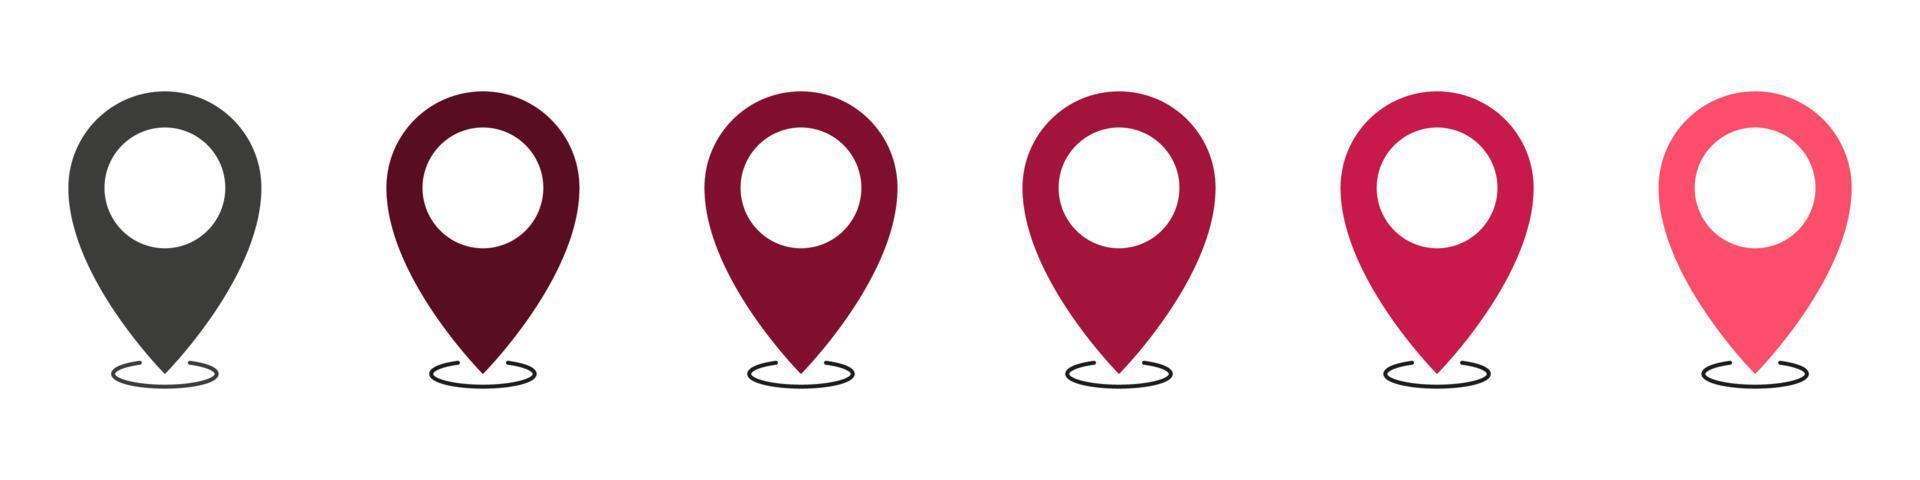 Marker icons collection. Pointer icons. Location or navigation signs. Map pin icon. Vector illustration